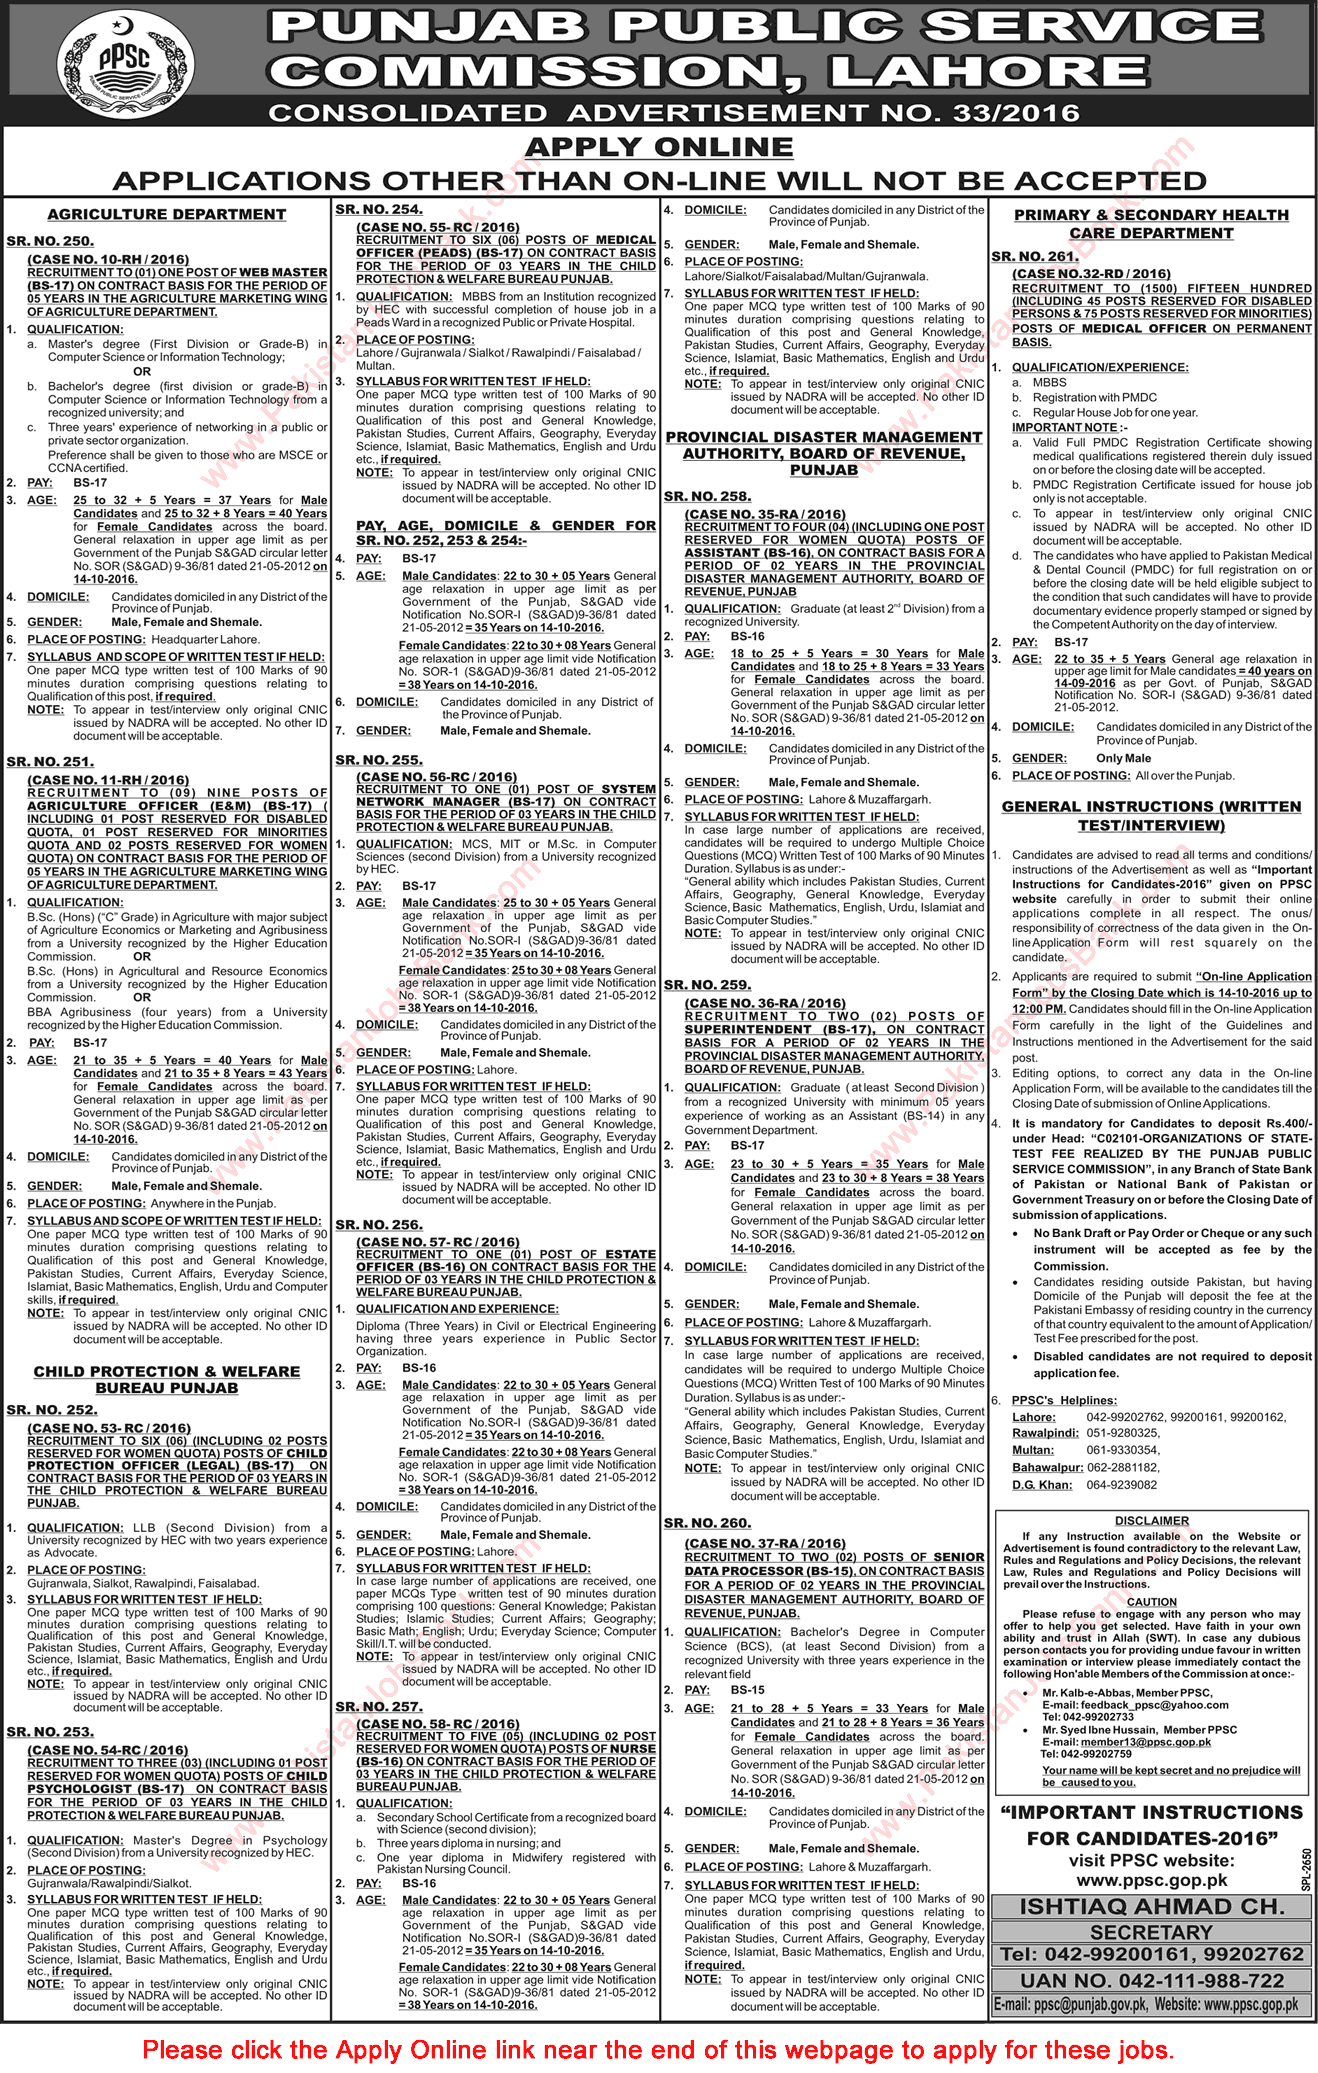 PPSC Jobs September 2016 Consolidated Advertisement No.33/2016 Apply Online Latest